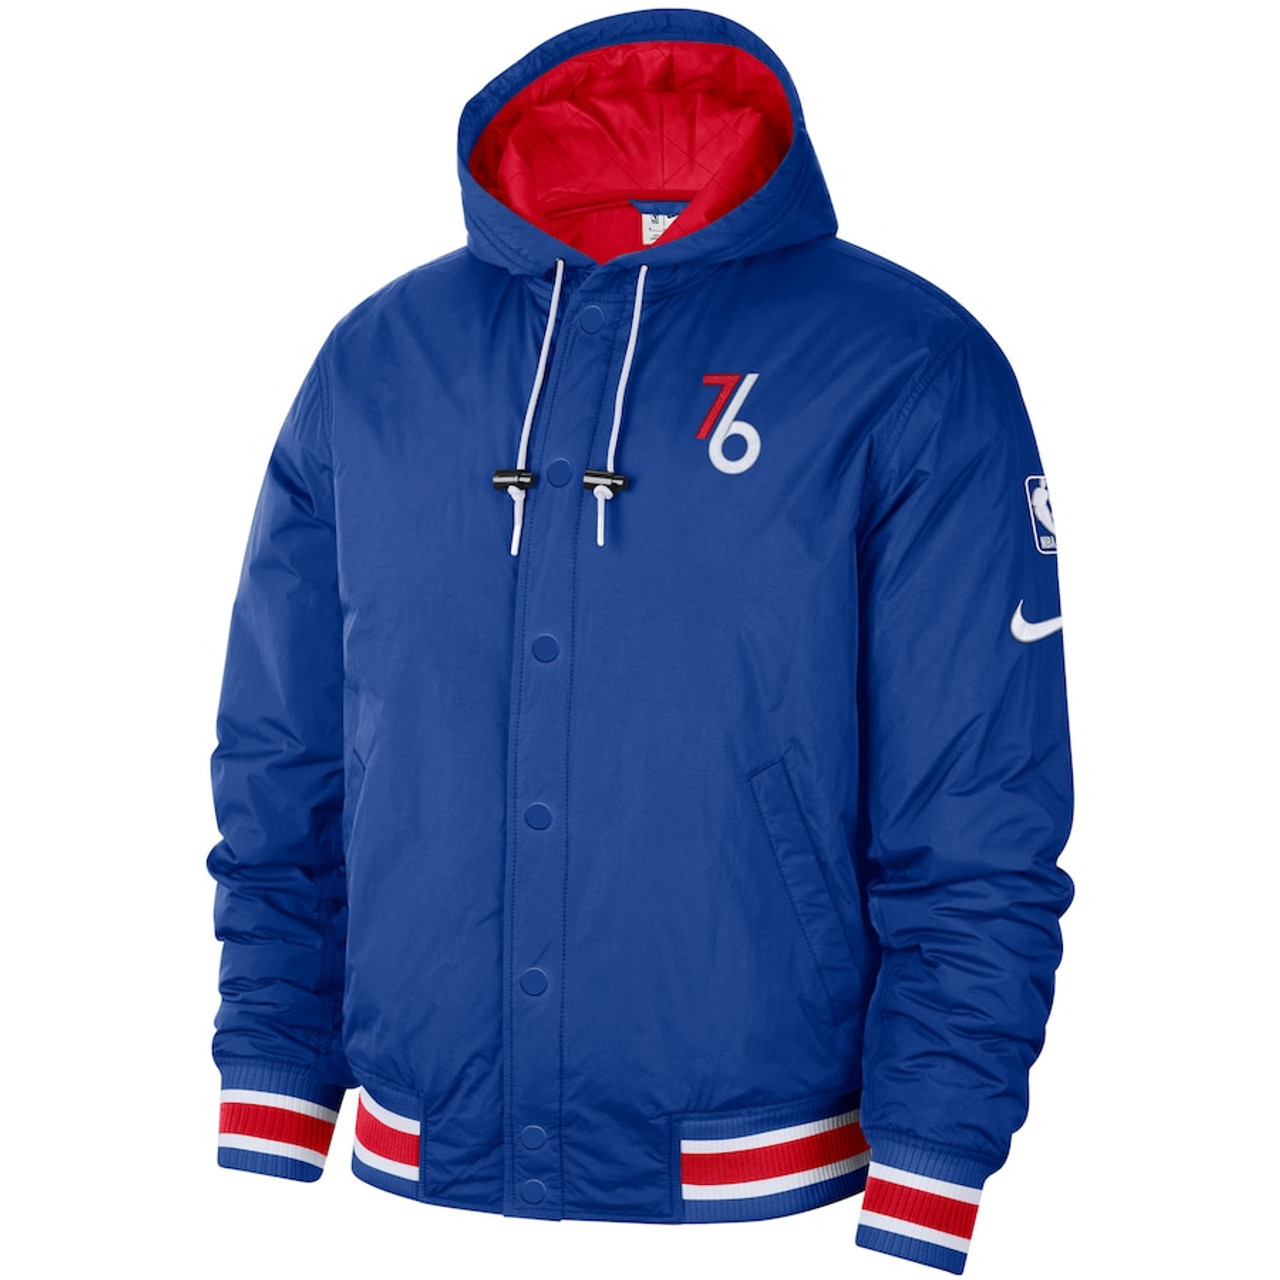 Nike Sixers Hoodie For Men And Women